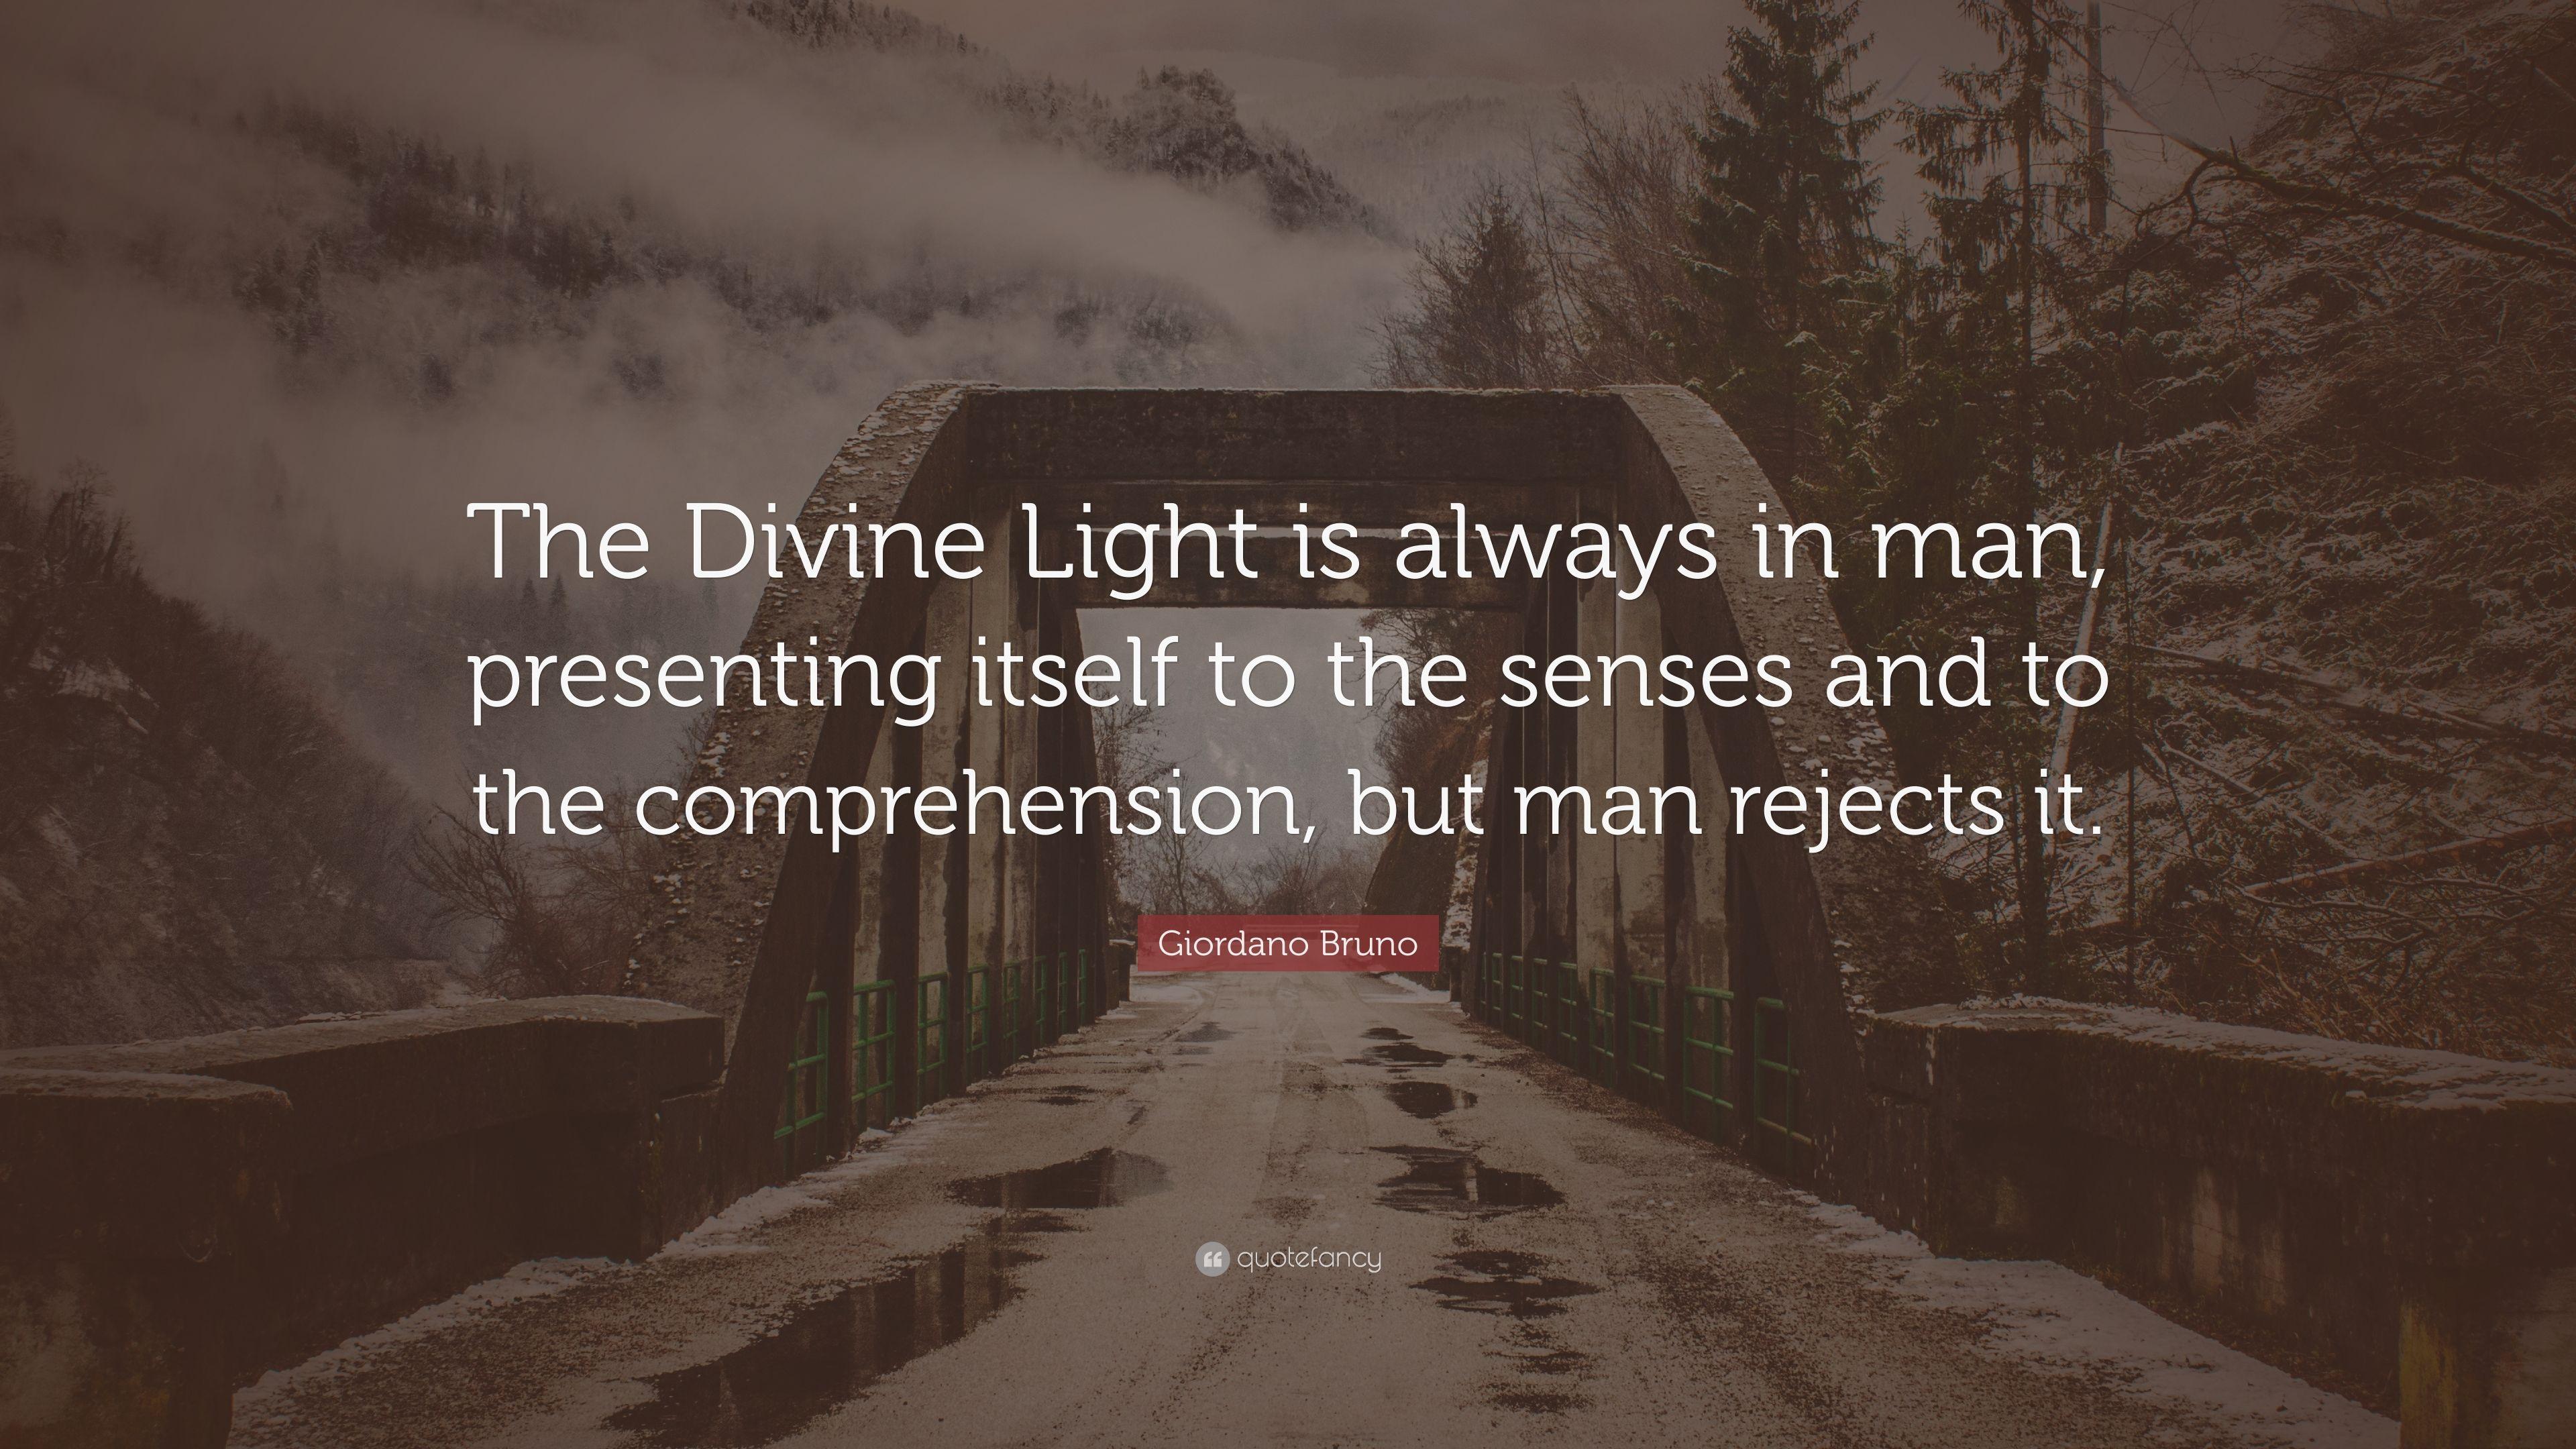 Giordano Bruno Quote: “The Divine Light is always in man